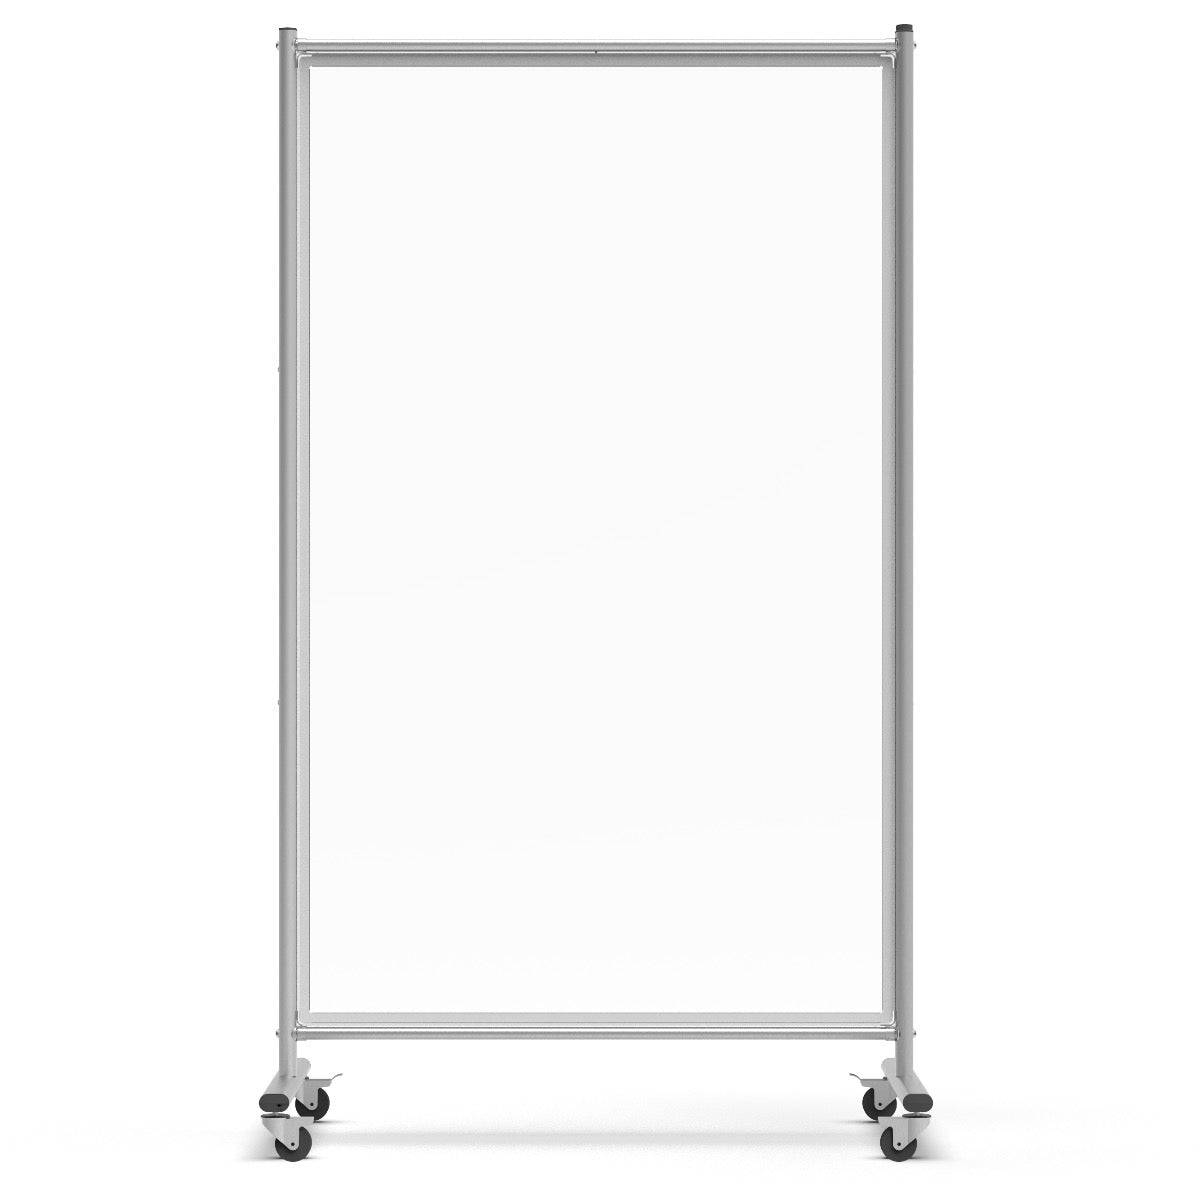 40"W x 72"H Mobile Whiteboard - Double-sided Room Divider Magnetic dry erase markerboard - Luxor MD4072W - SchoolOutlet